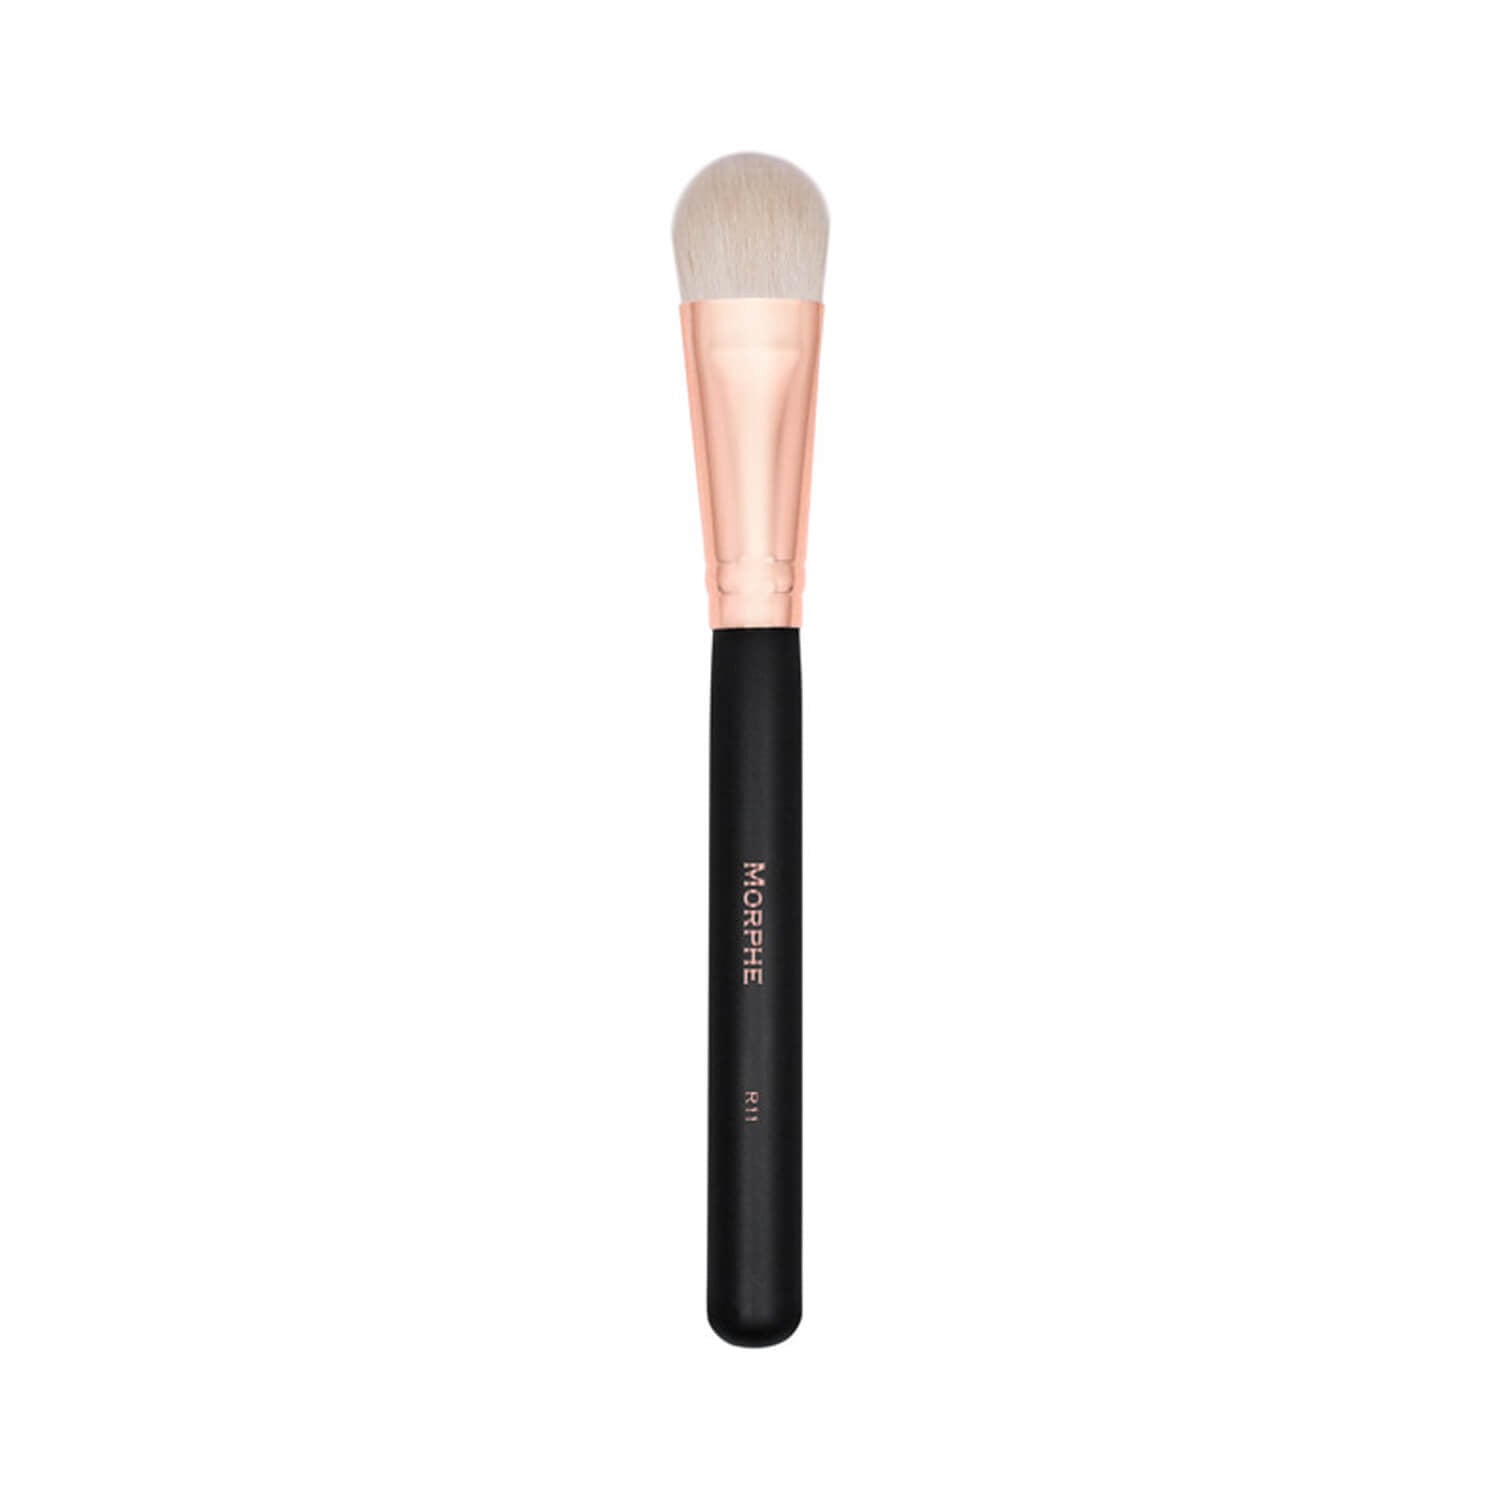 Morphe Cosmetics R11 Deluxe Oval Shadow Brush